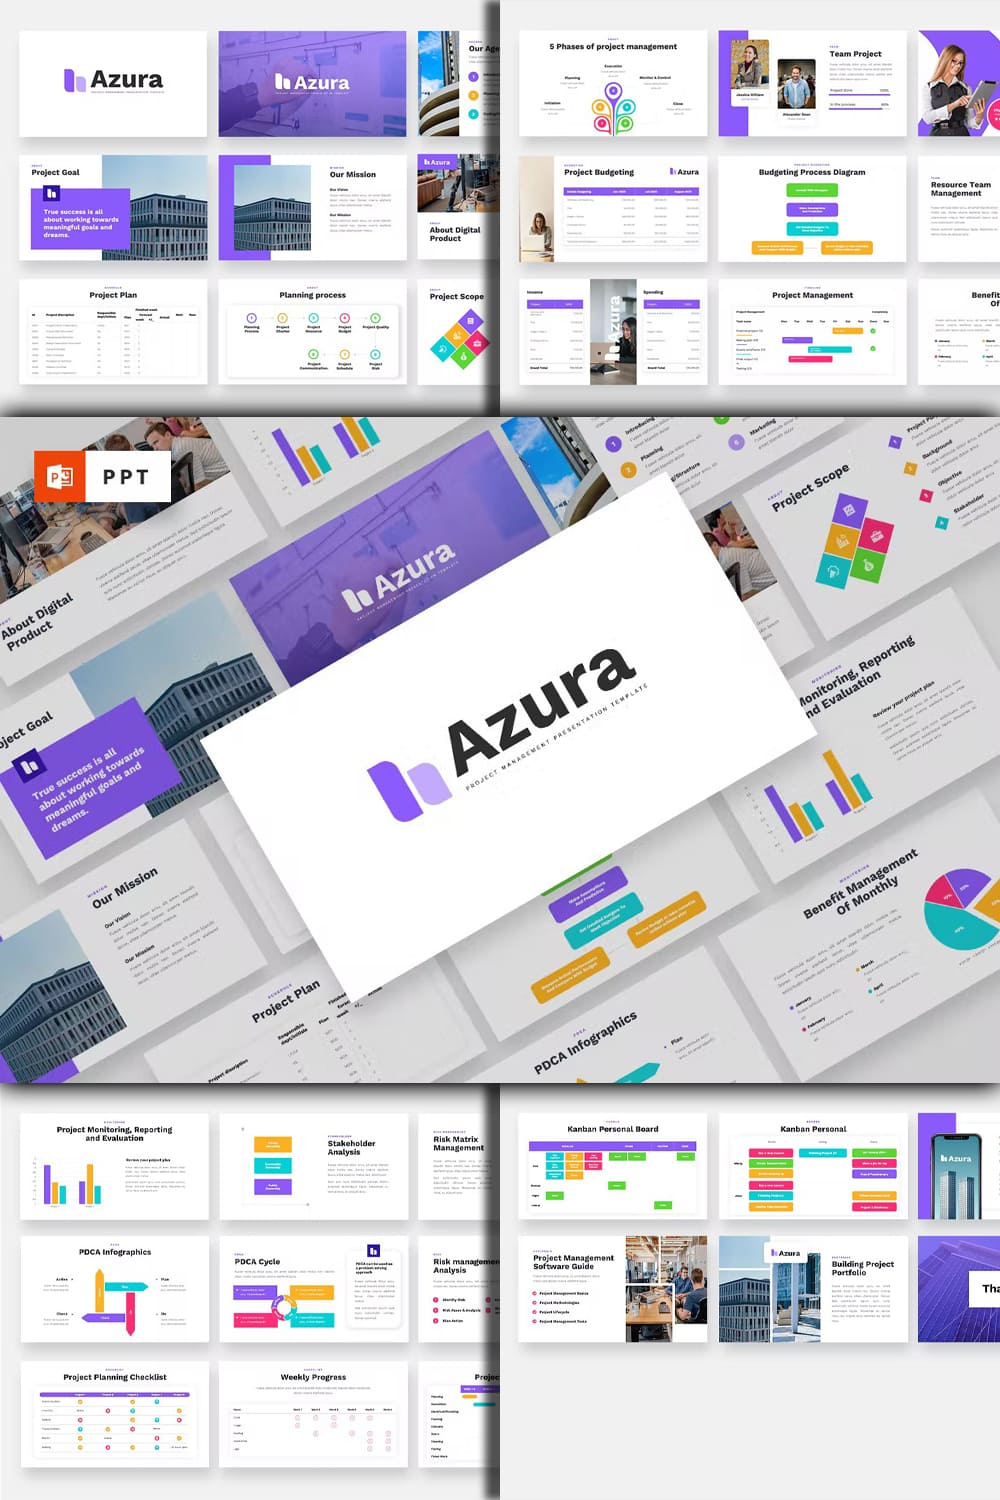 Azura project management powerpoint template - pinterest image preview.